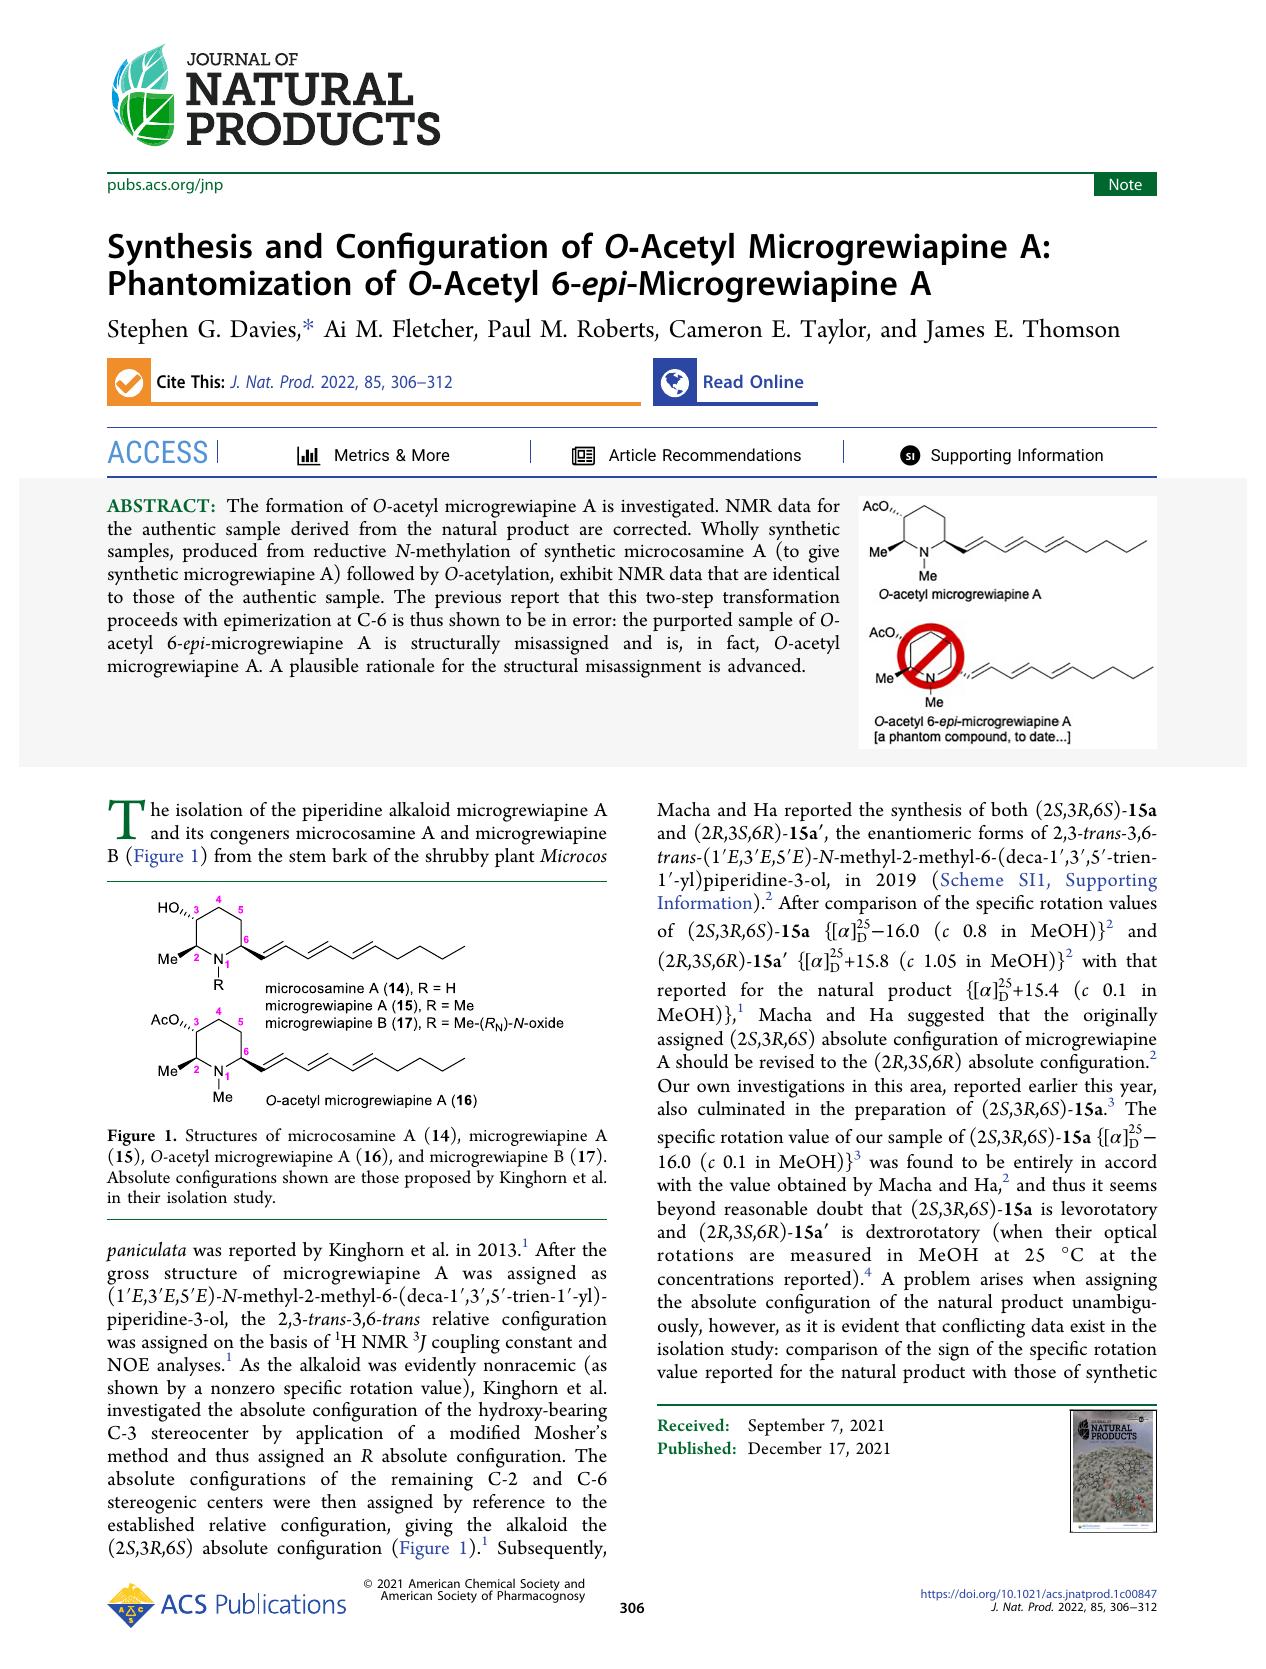 Synthesis and Configuration of O-Acetyl Microgrewiapine A: Phantomization of O-Acetyl 6-epi-Microgrewiapine A by Stephen G. Davies Ai M. Fletcher Paul M. Roberts Cameron E. Taylor and James E. Thomson